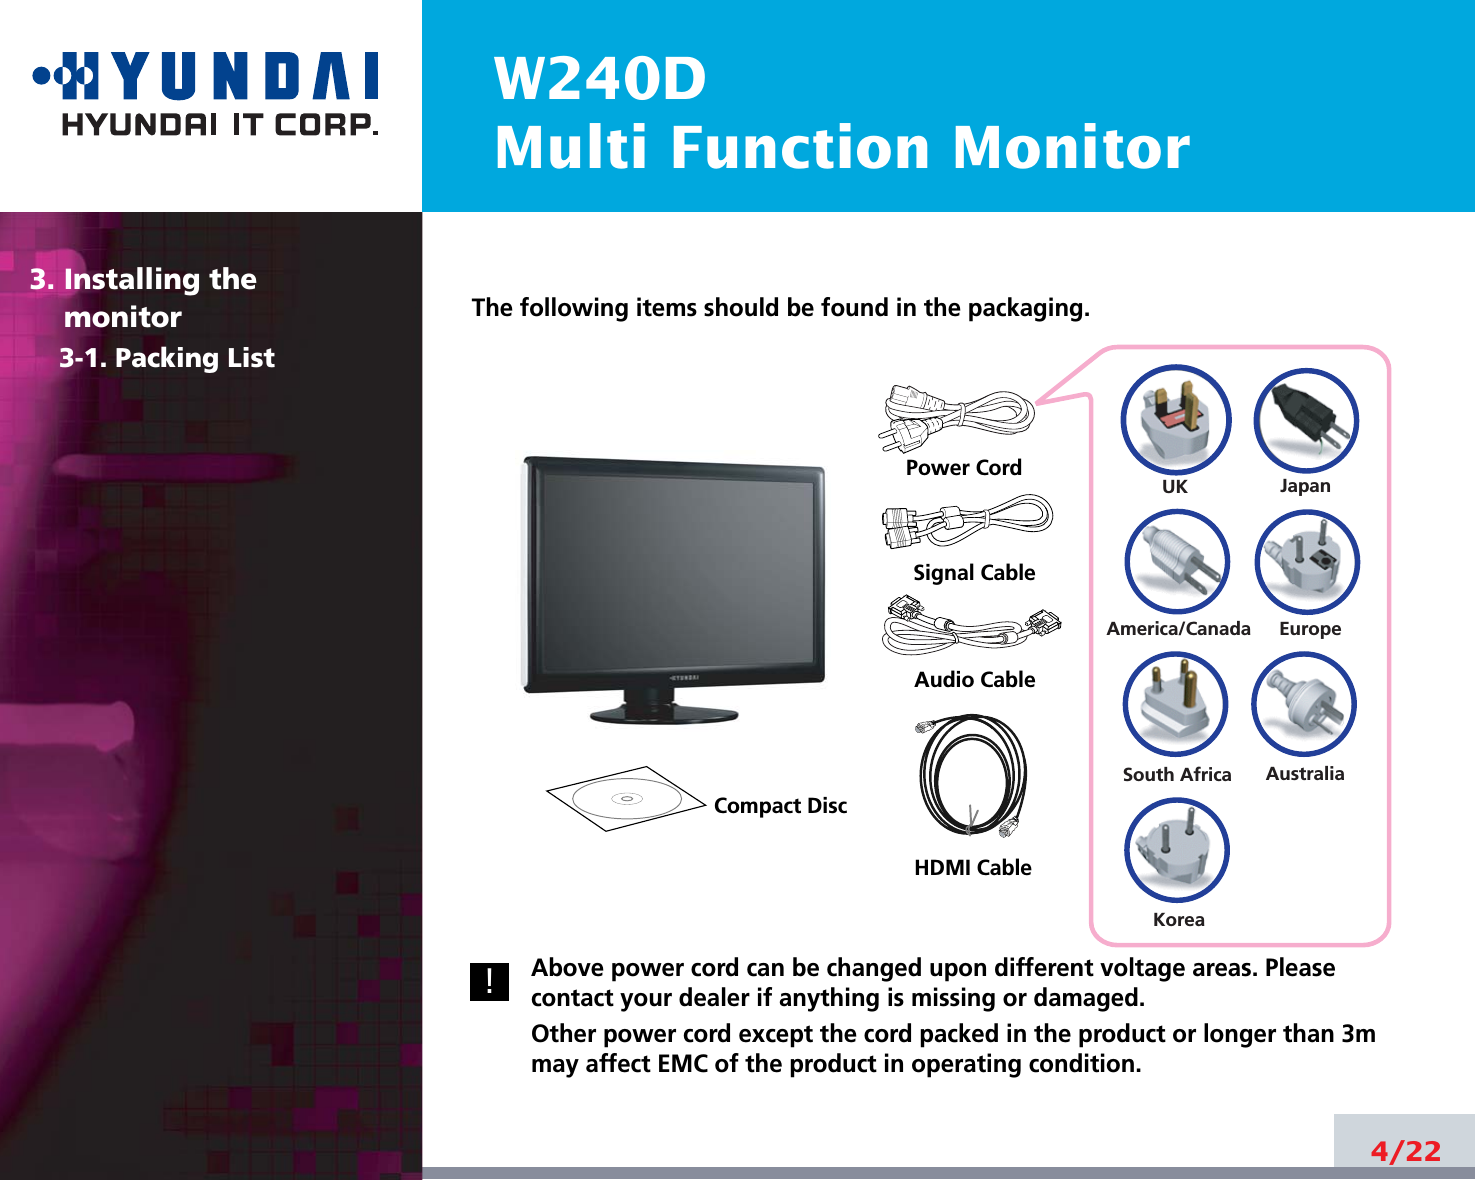 W240DMulti Function Monitor4/22The following items should be found in the packaging.Above power cord can be changed upon different voltage areas. Pleasecontact your dealer if anything is missing or damaged.Other power cord except the cord packed in the product or longer than 3mmay affect EMC of the product in operating condition.3. Installing the monitor3-1. Packing List!UKAmerica/CanadaJapanAustraliaKoreaEuropeSouth AfricaPower CordSignal CableCompact DiscHDMI Cable Audio Cable 